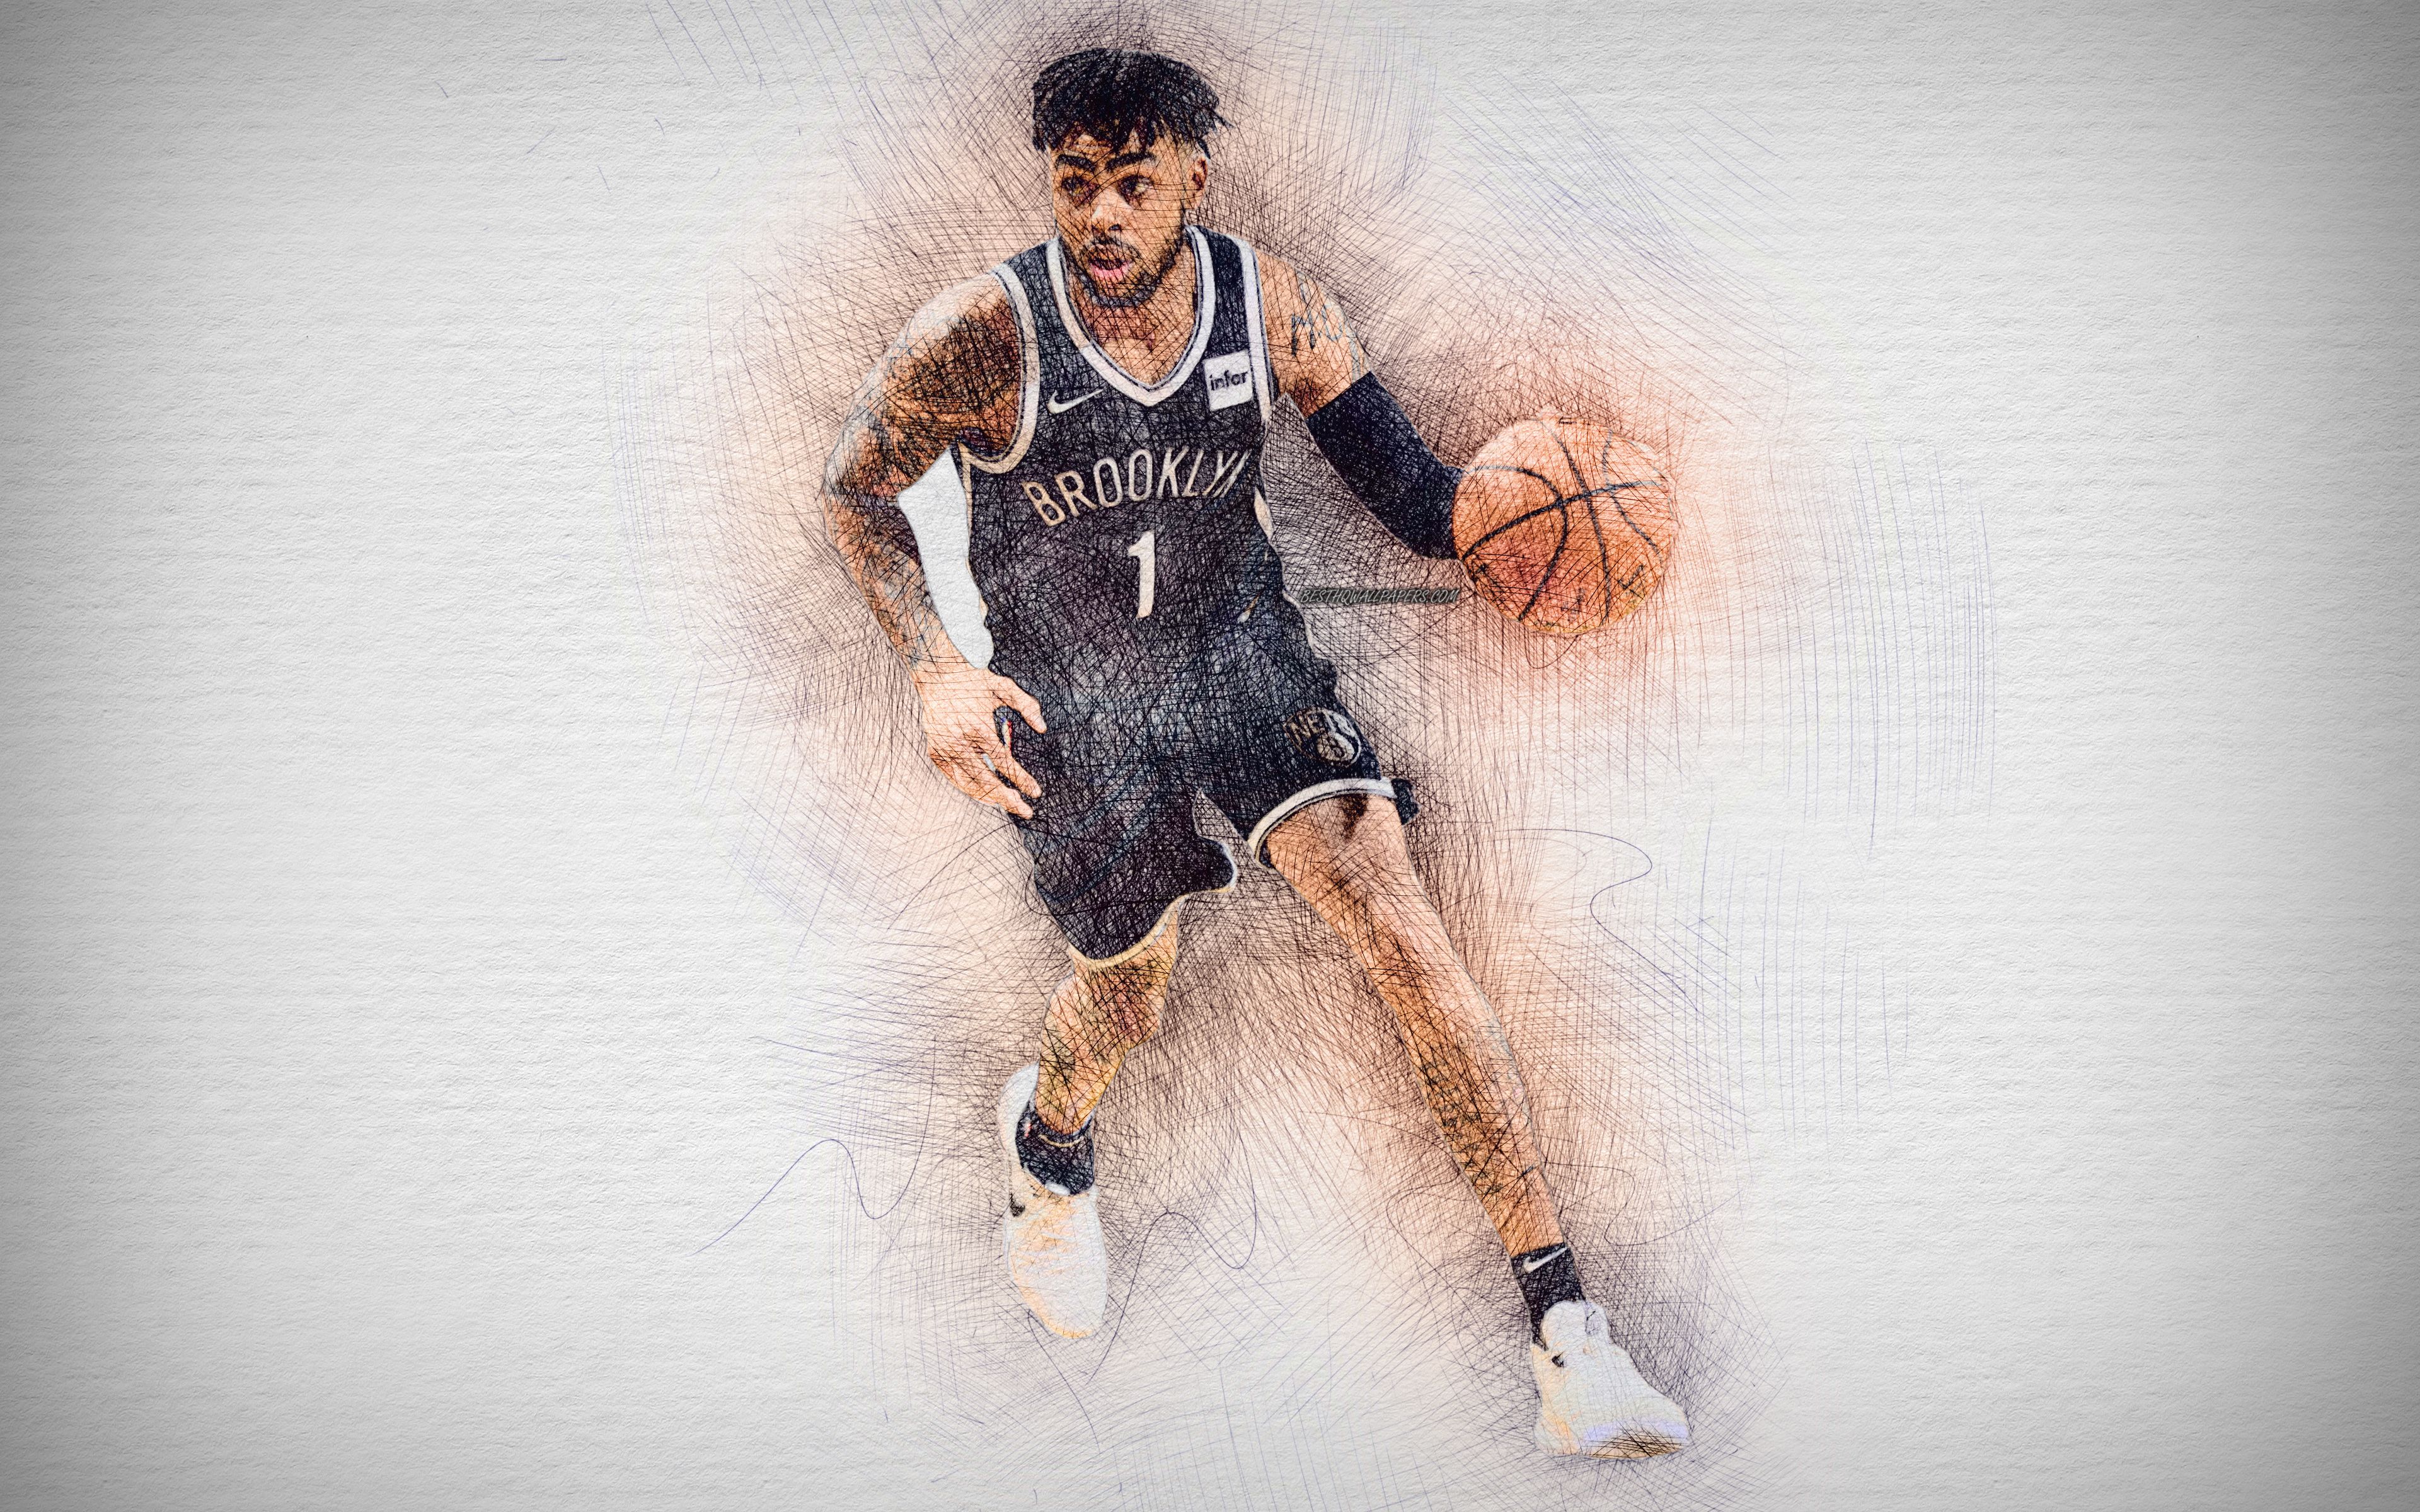 Download wallpaper D Angelo Russell, 4k, artwork, basketball stars, Brooklyn Nets, NBA, basketball, drawing D Angelo Russell for desktop with resolution 3840x2400. High Quality HD picture wallpaper